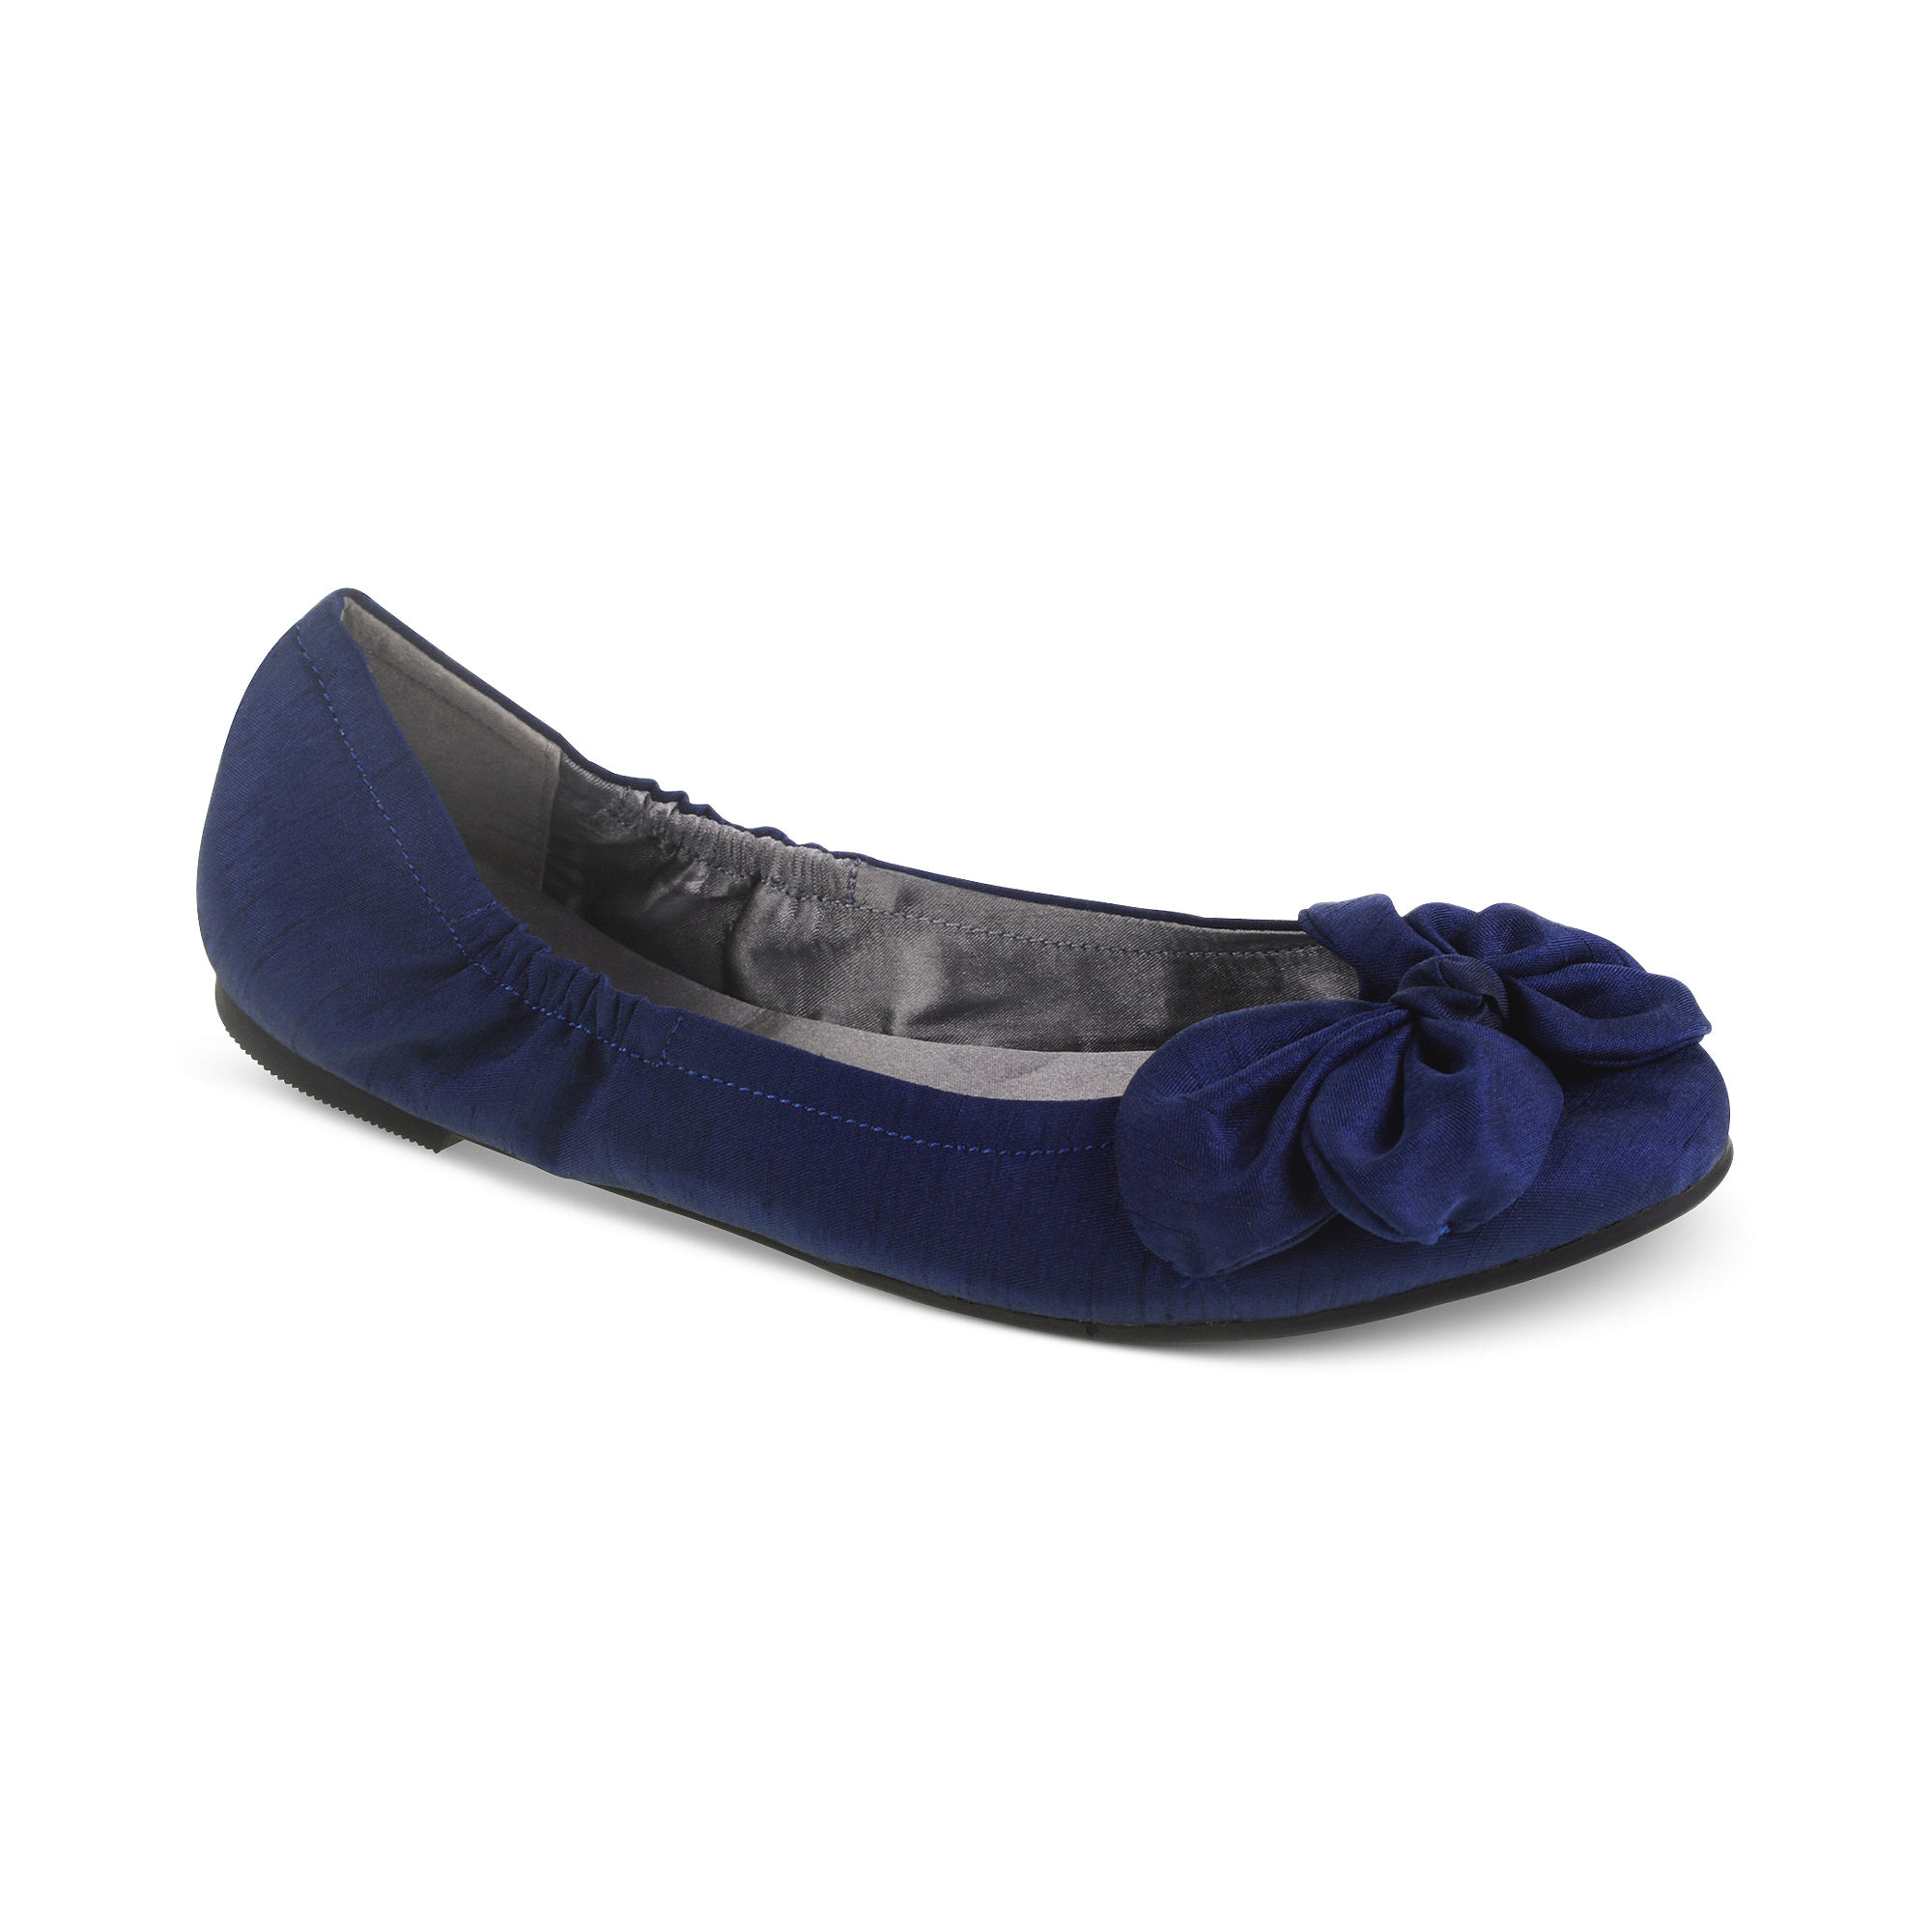 Lyst - Chinese Laundry Cl By Laundry Shoes Great Life Flats in Blue